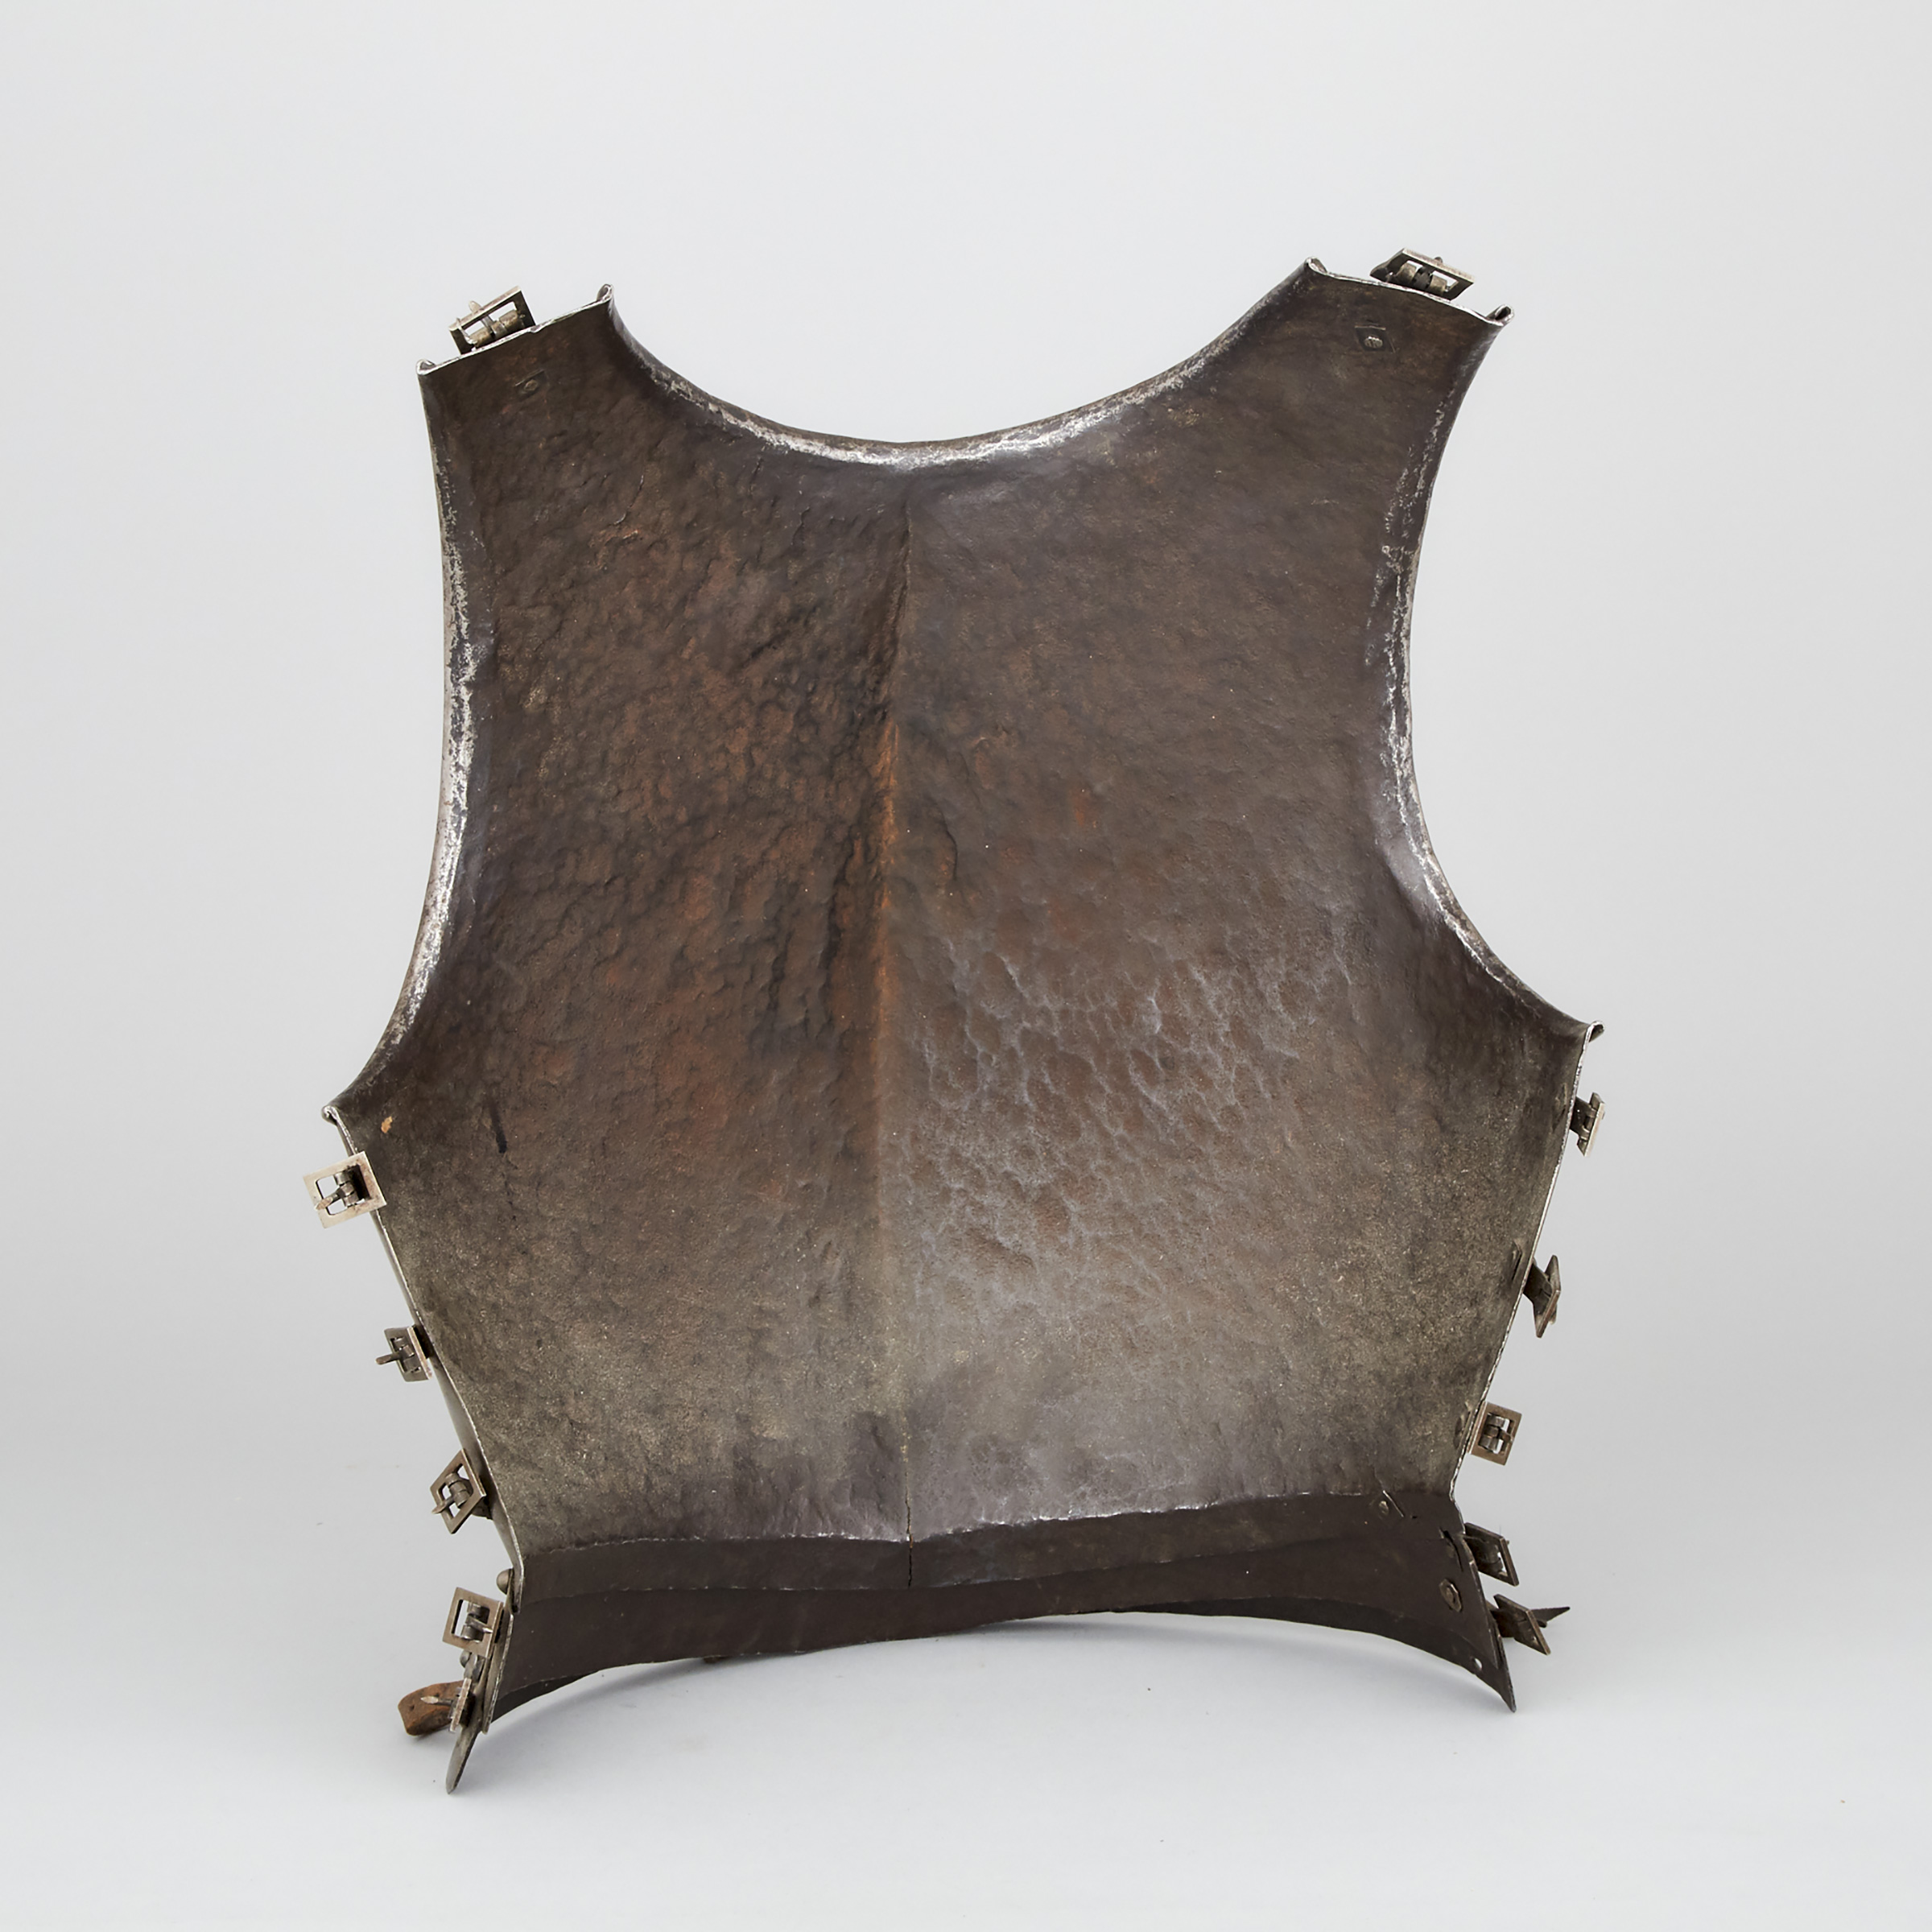 North Italian Infantry Breastplate, early 17th century